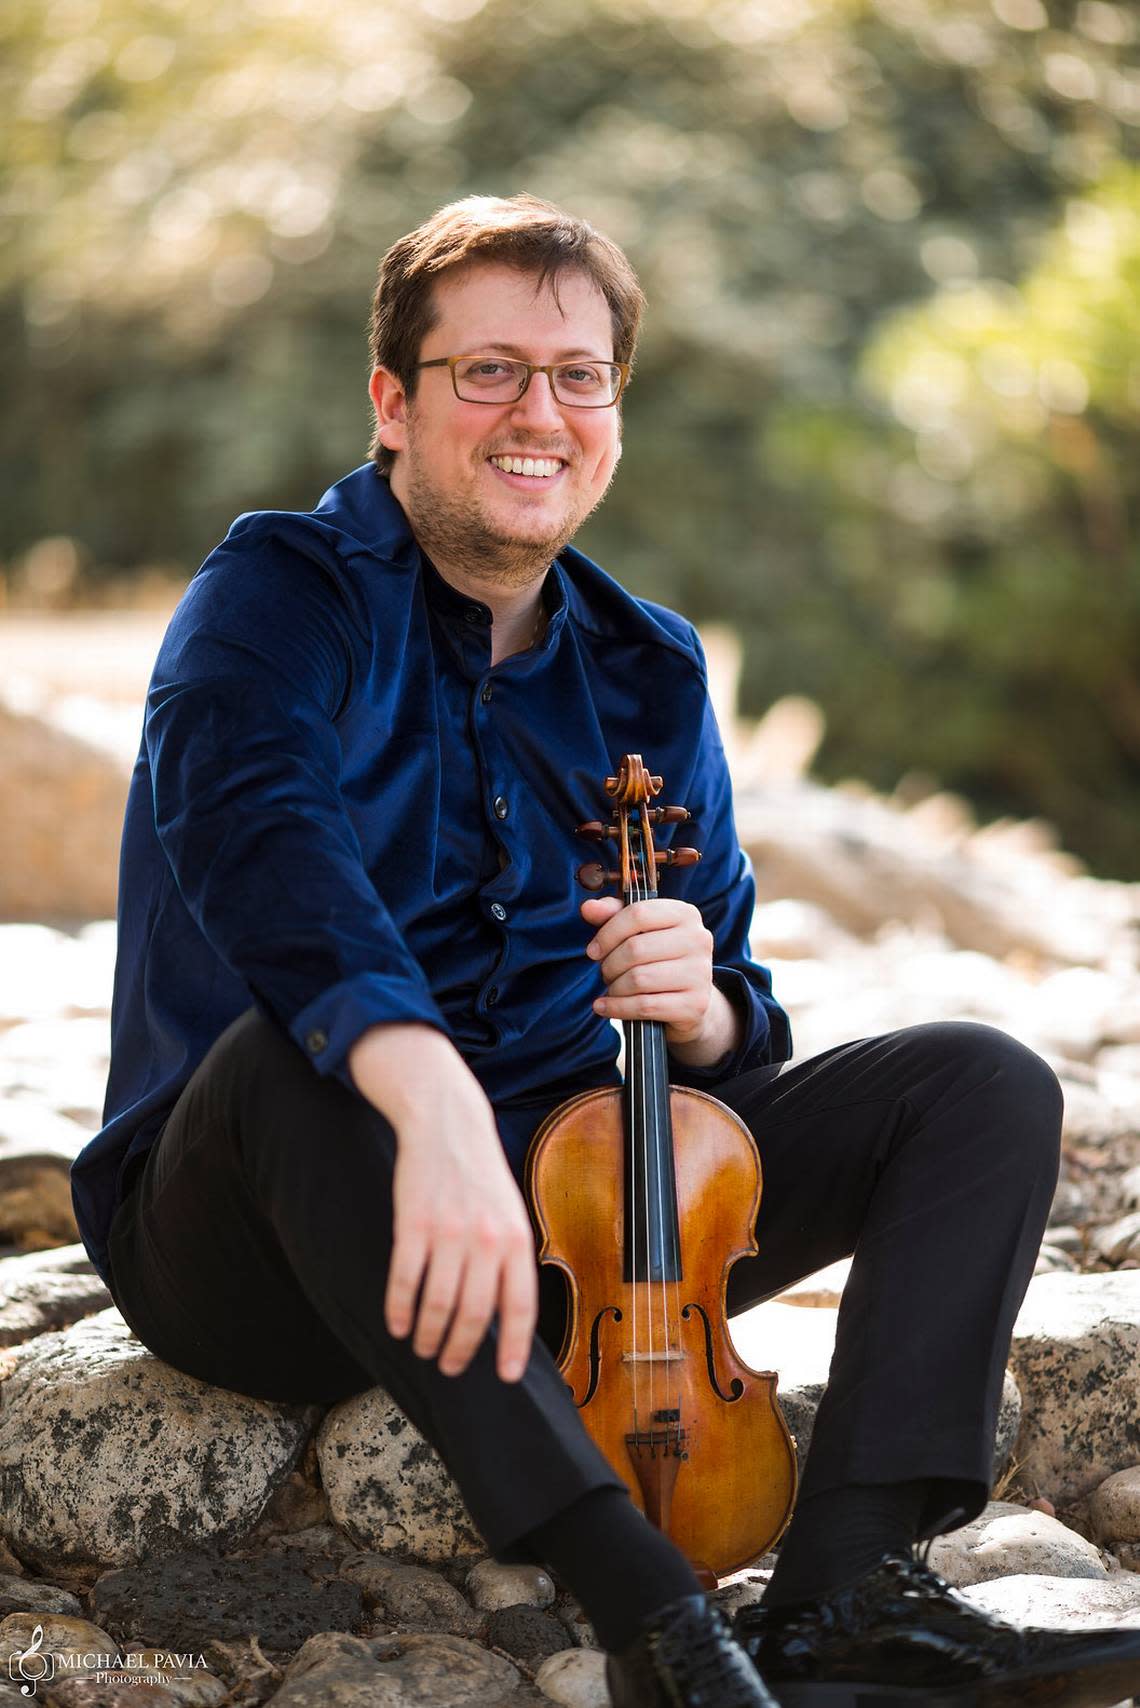 David Radzynski, who studied at Park University’s International Center for Music, will be the new concertmaster of the Cleveland Orchestra.